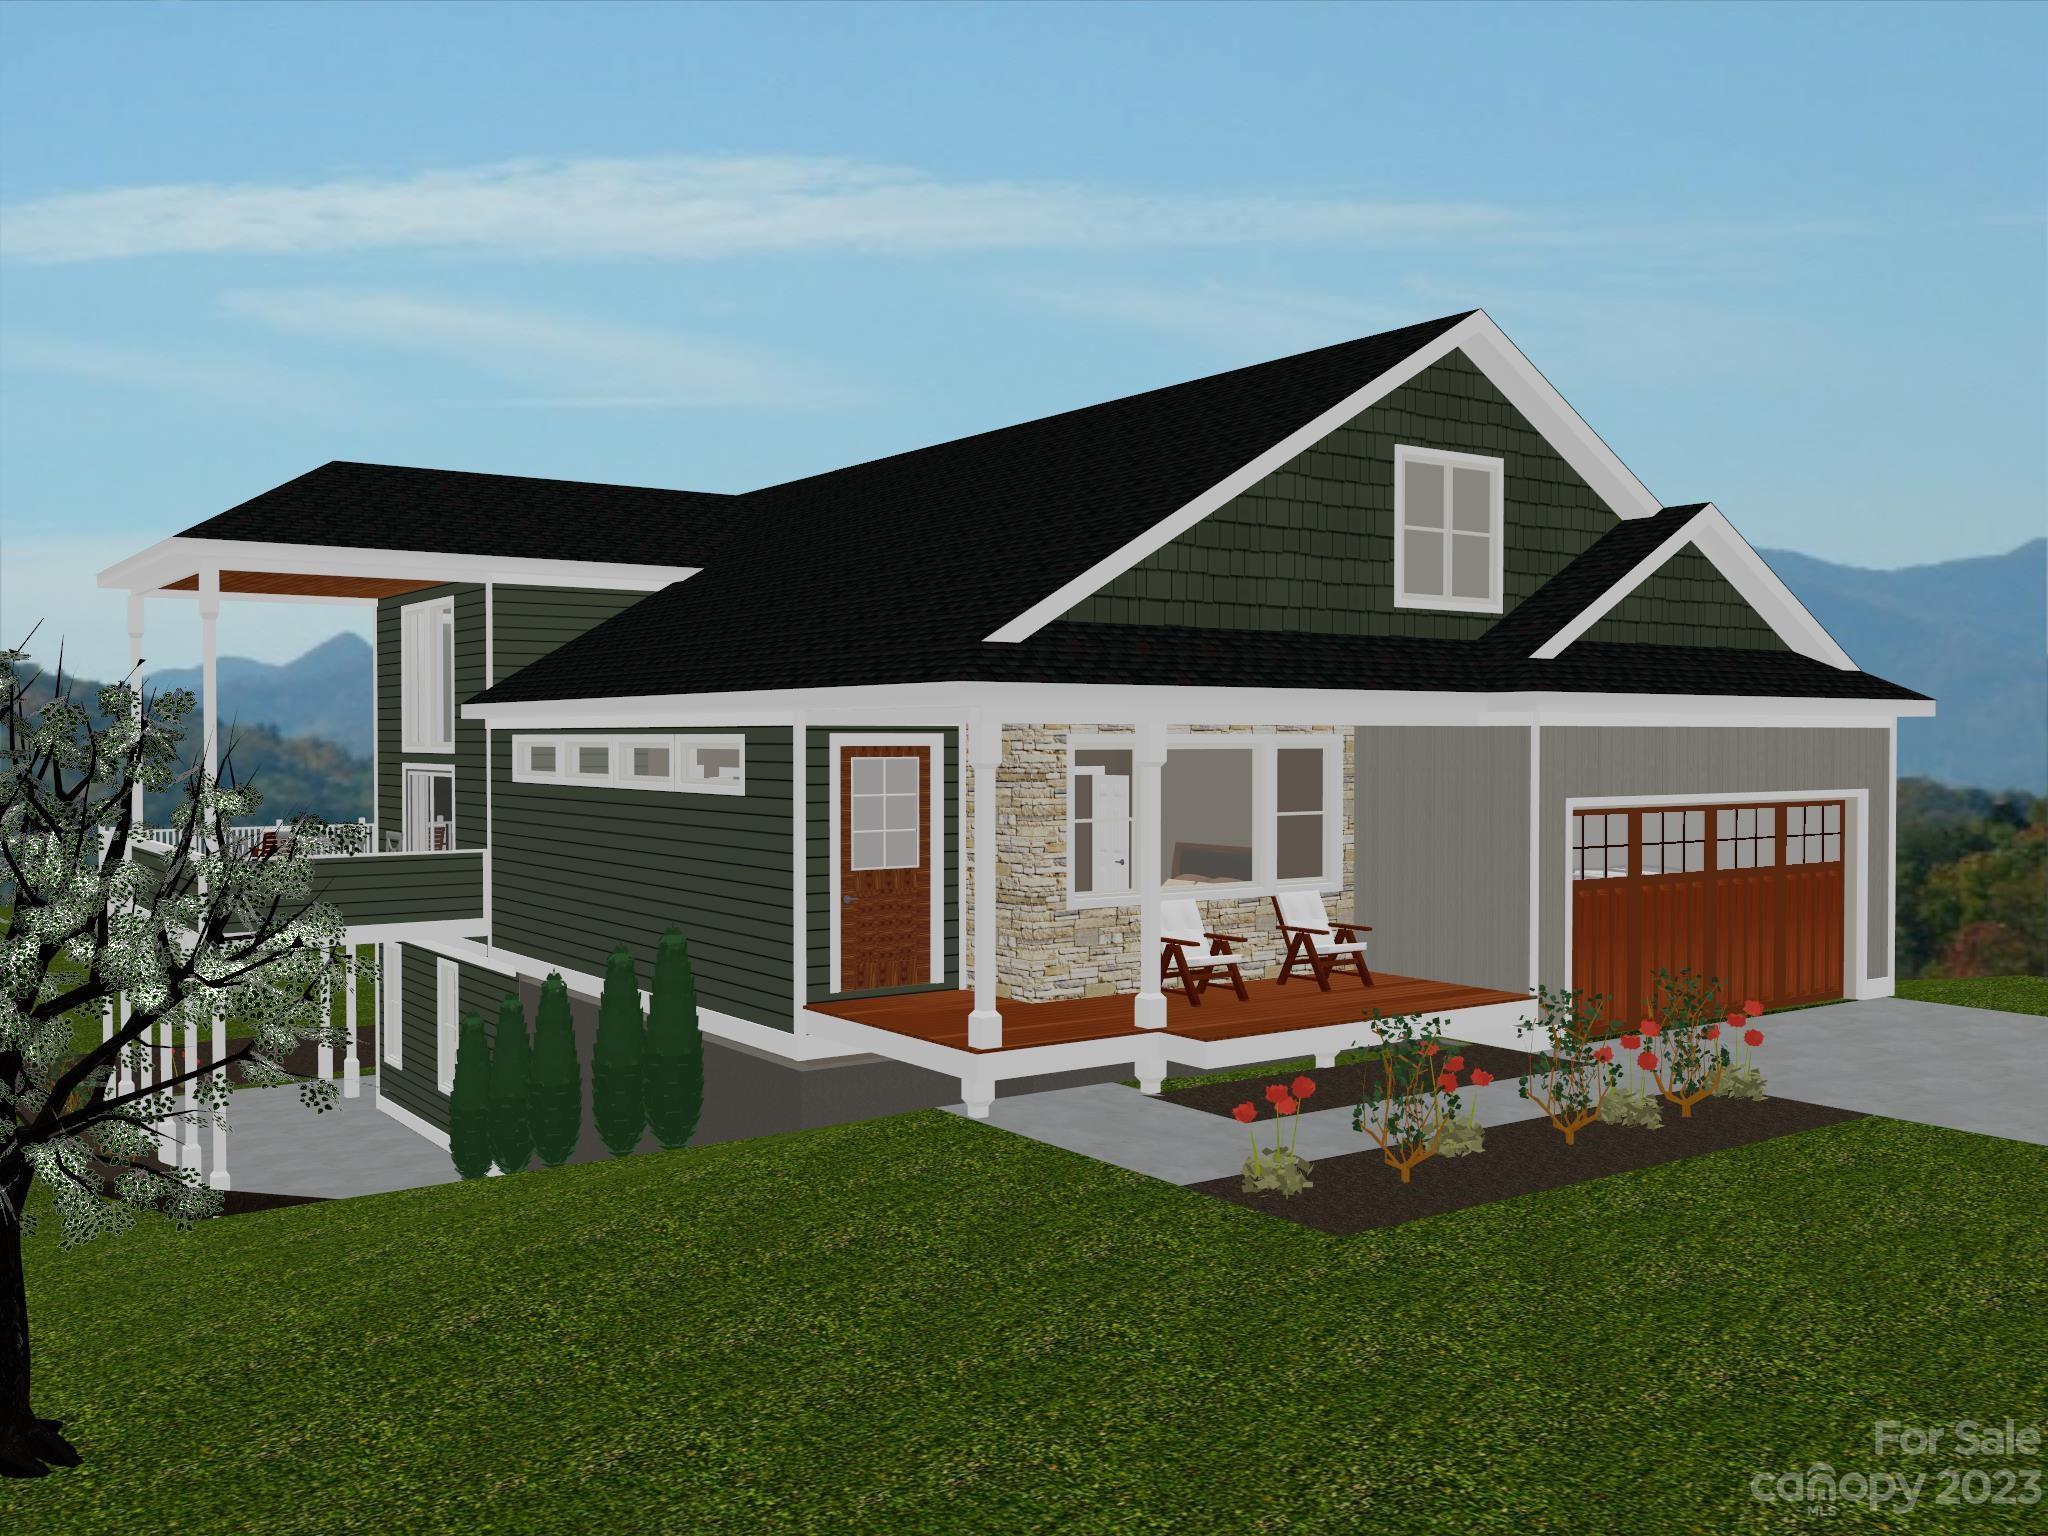 a front view of house with yard and outdoor seating